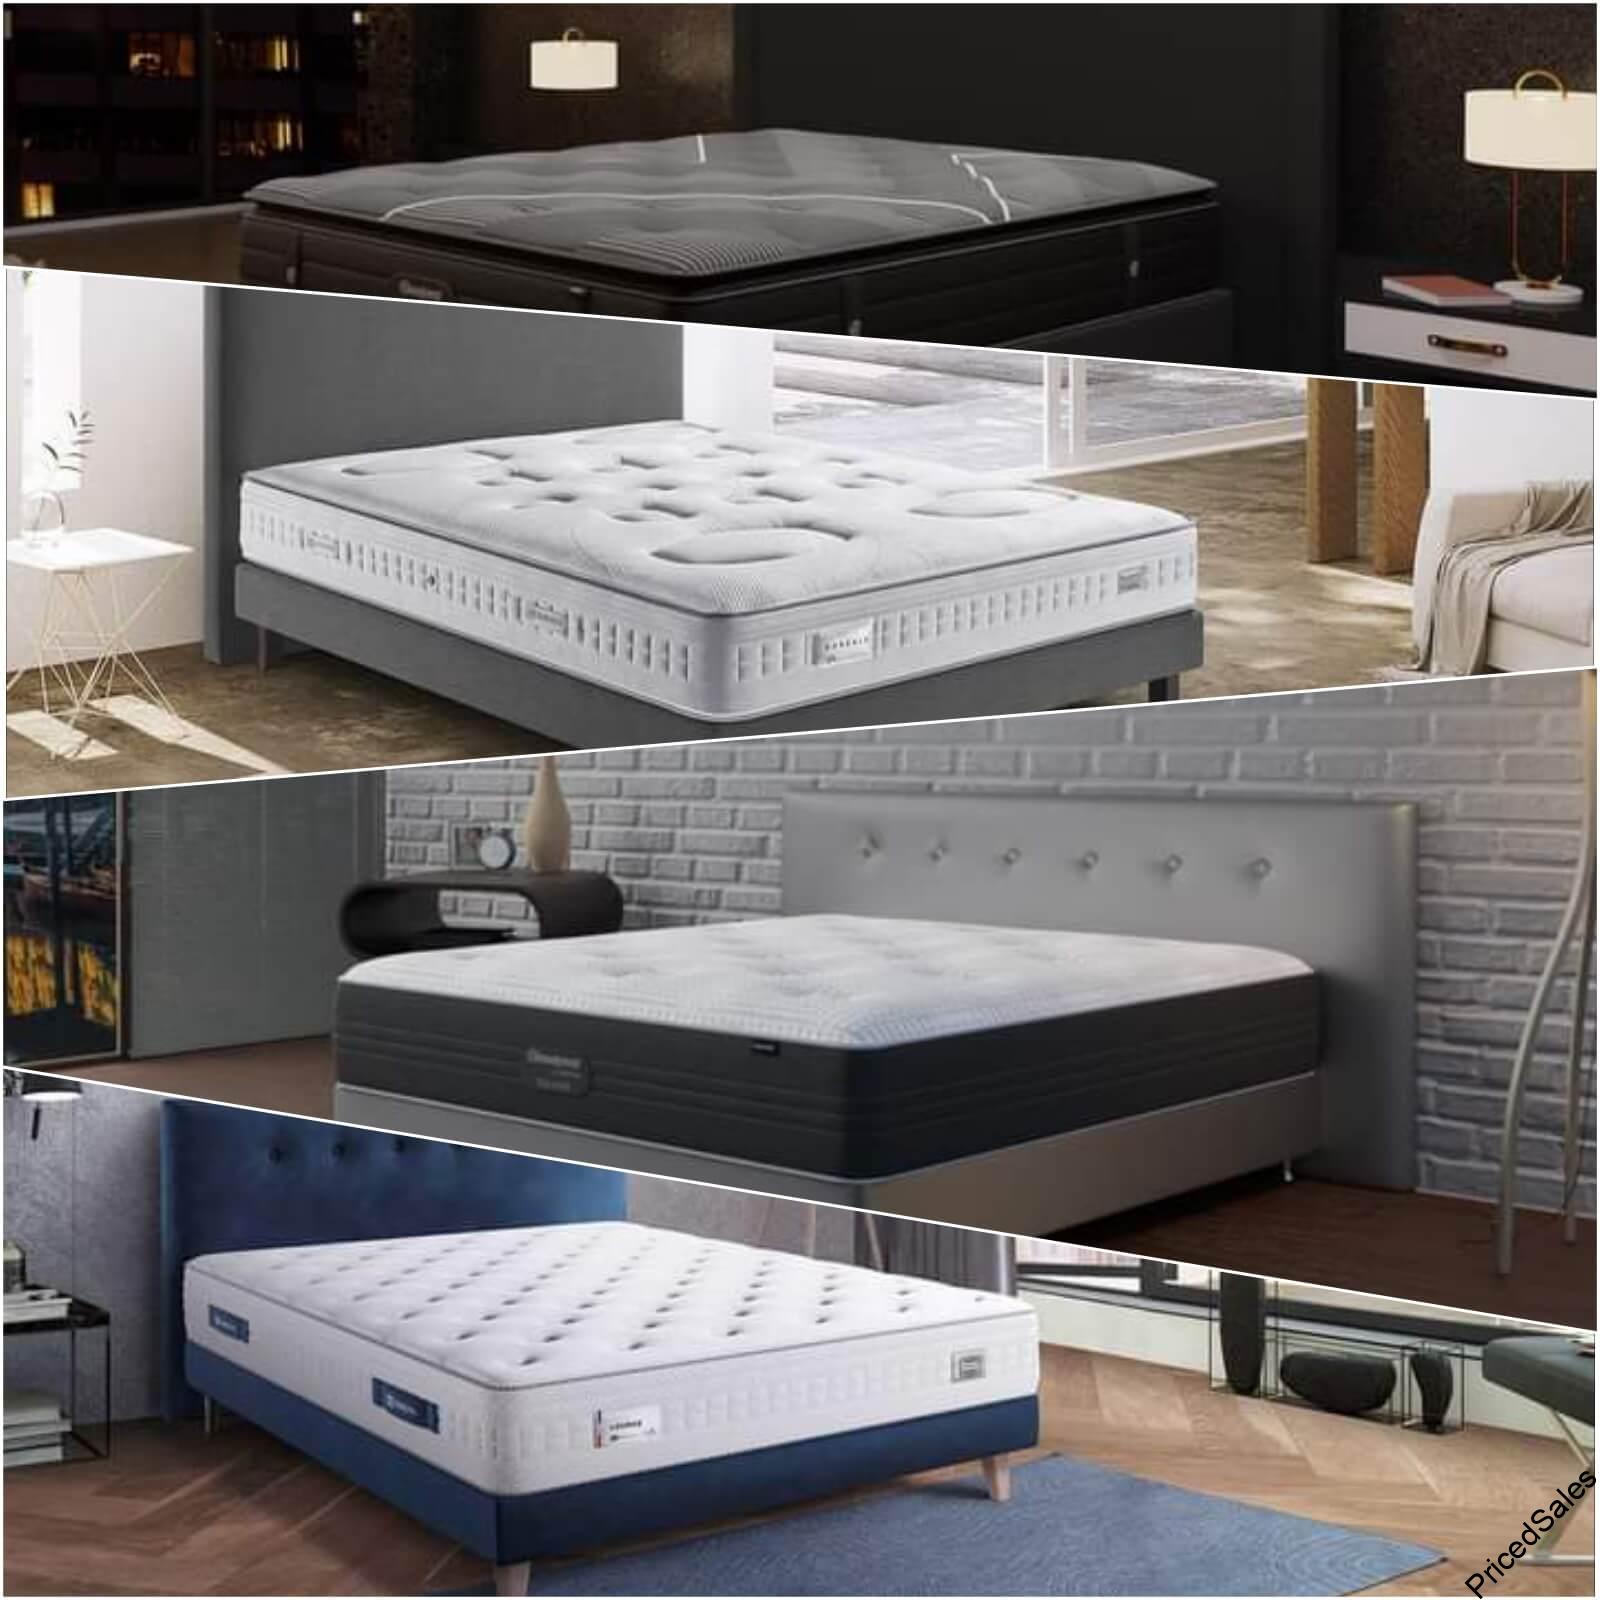 Beautyrest Simmons mattresses bed price